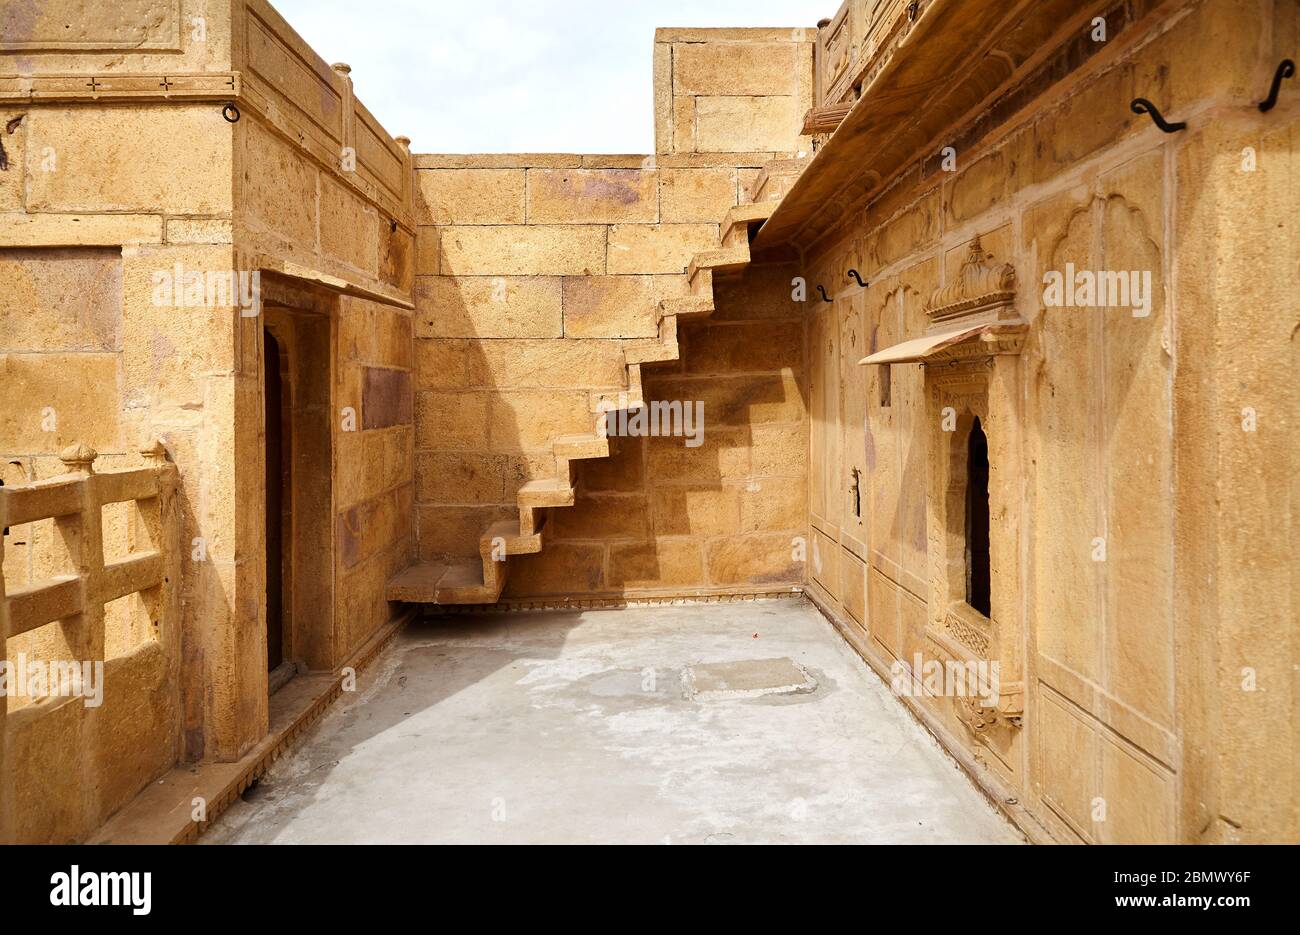 Architecture of old Haveli with stairs and doors at city palace museum in Jaisalmer, Rajasthan, India Stock Photo